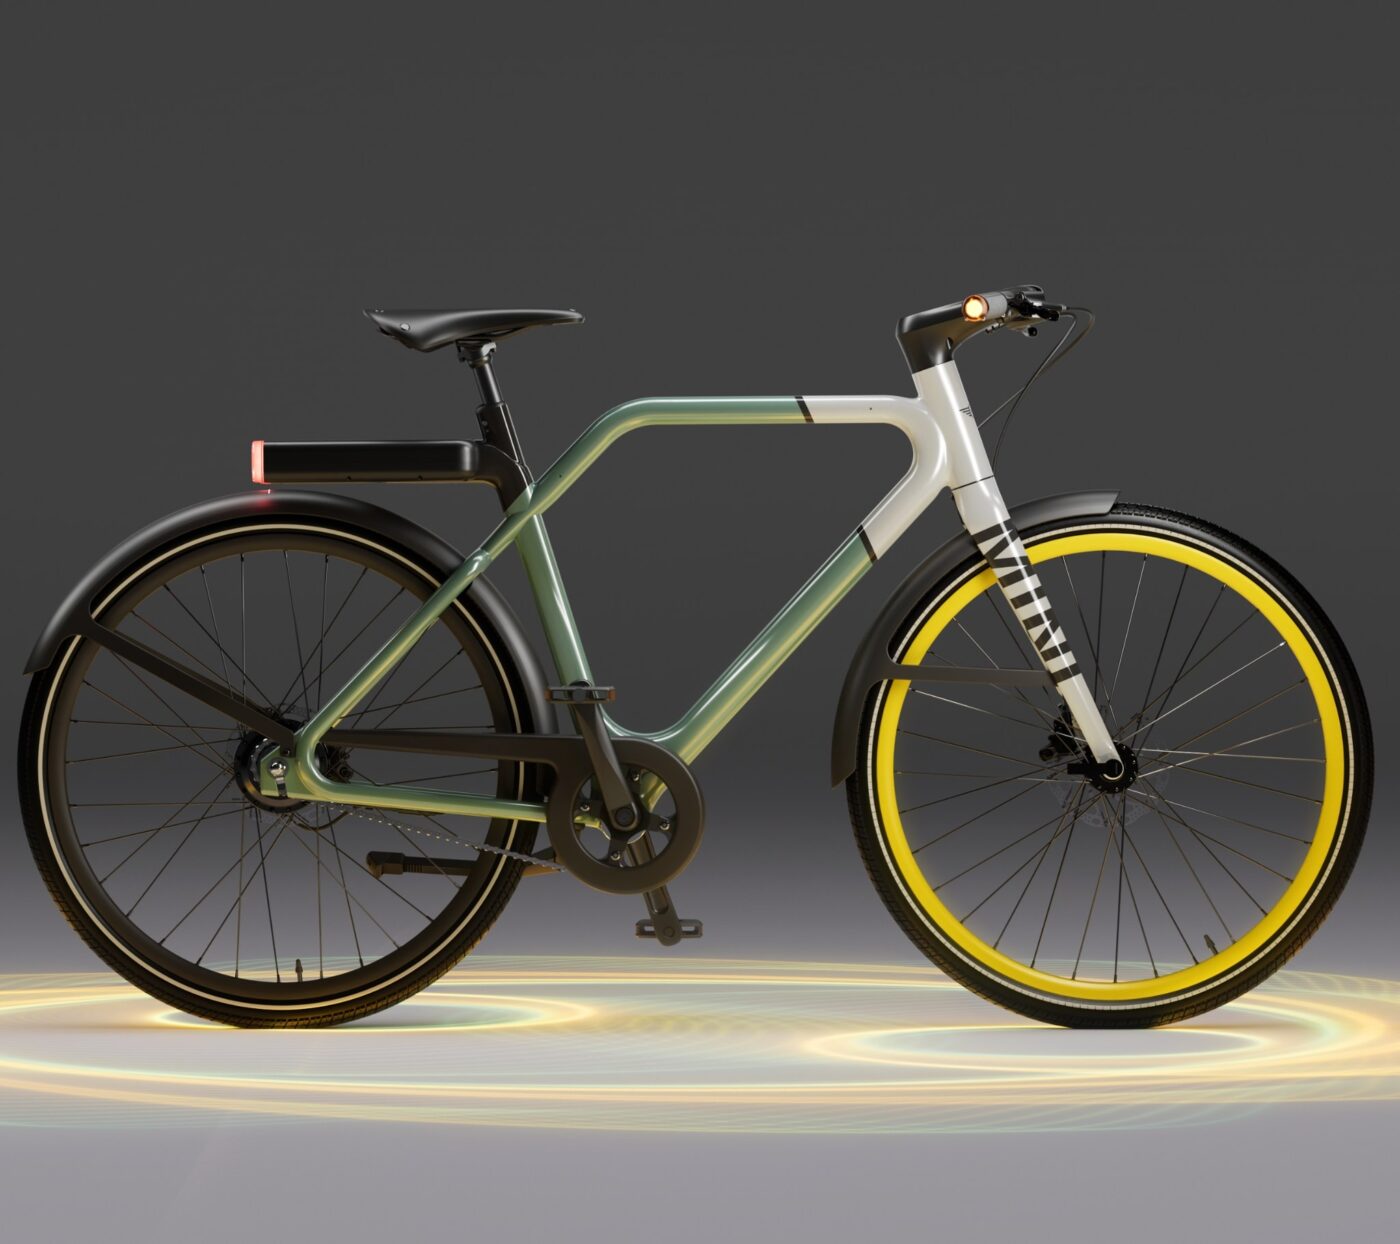 MINI Debuts Two New Limited-Edition E-Bikes For The Urban Commuters Of The World